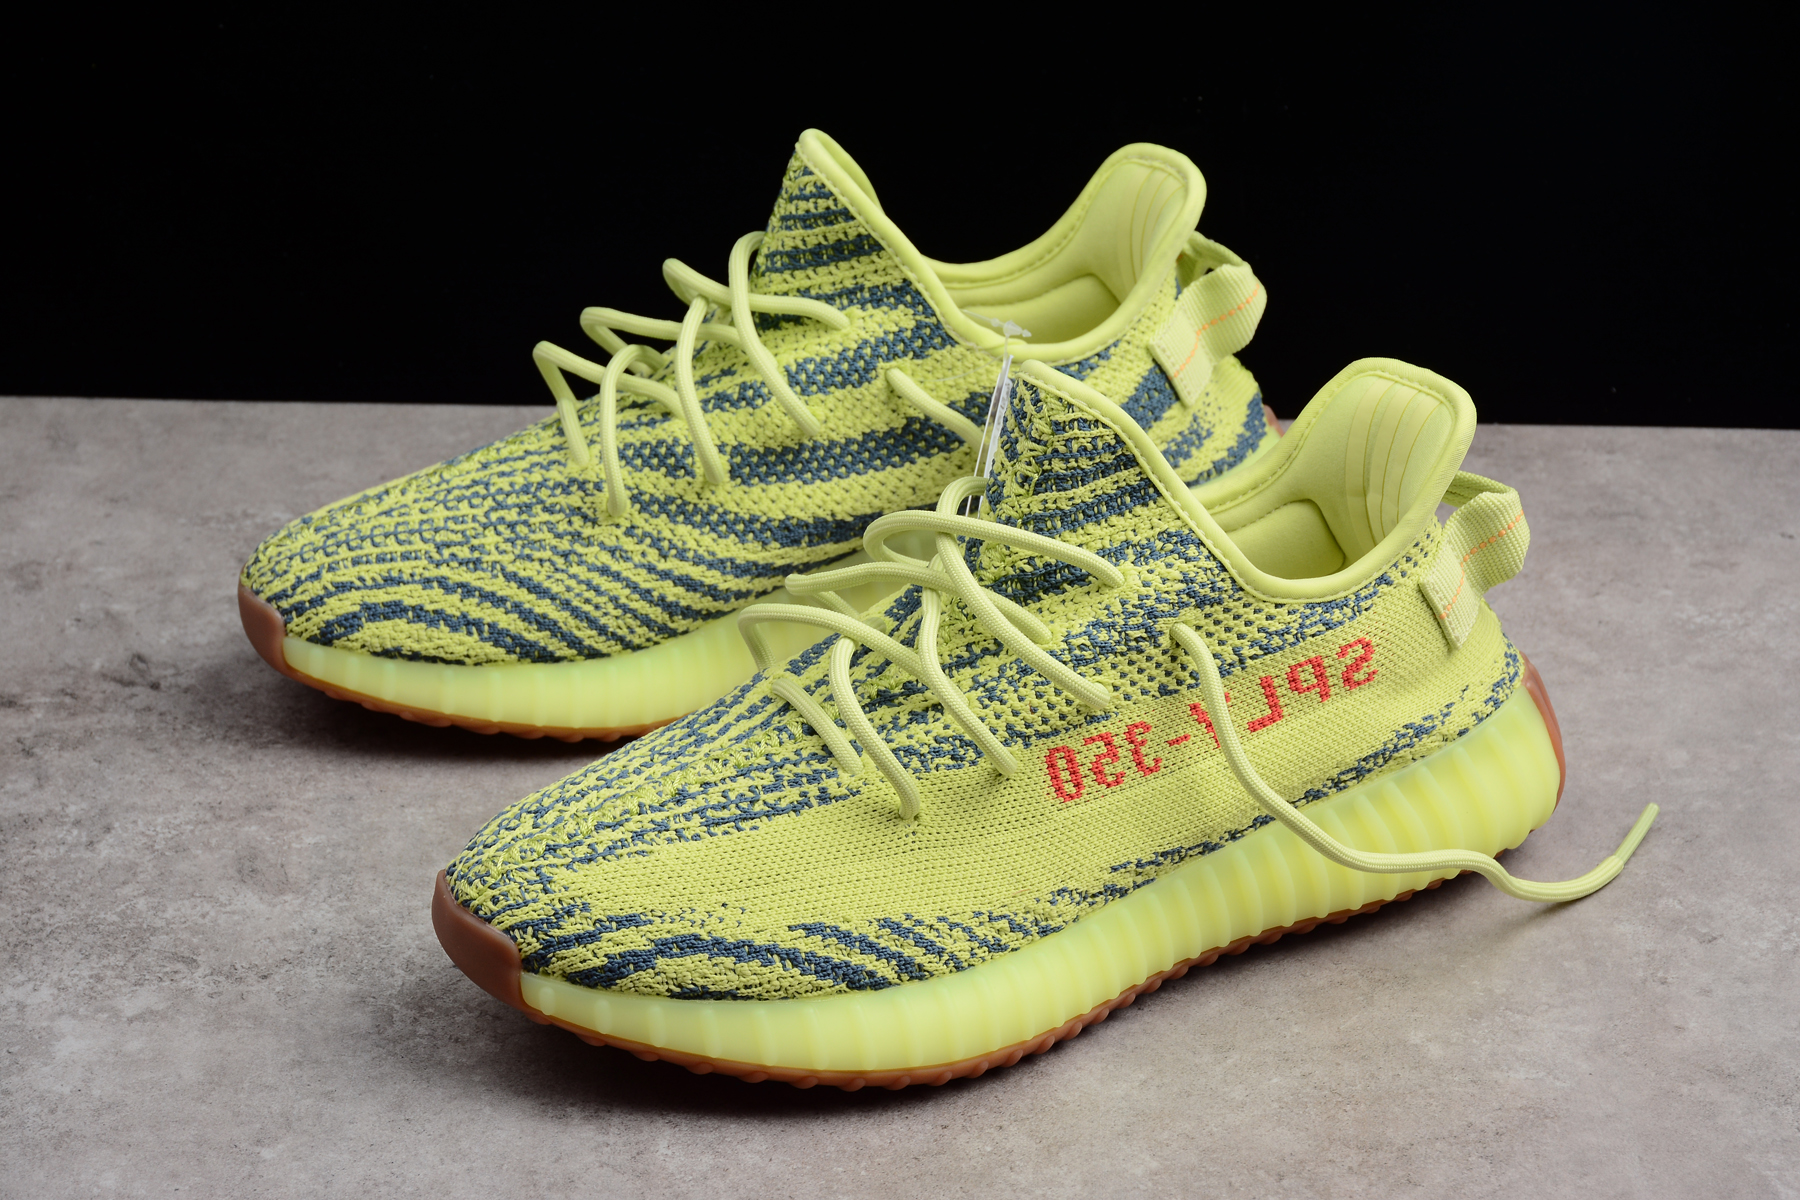 adidas are Set to Re-Release the YEEZY BOOST 350 V2 “Semi Frozen Yellow”